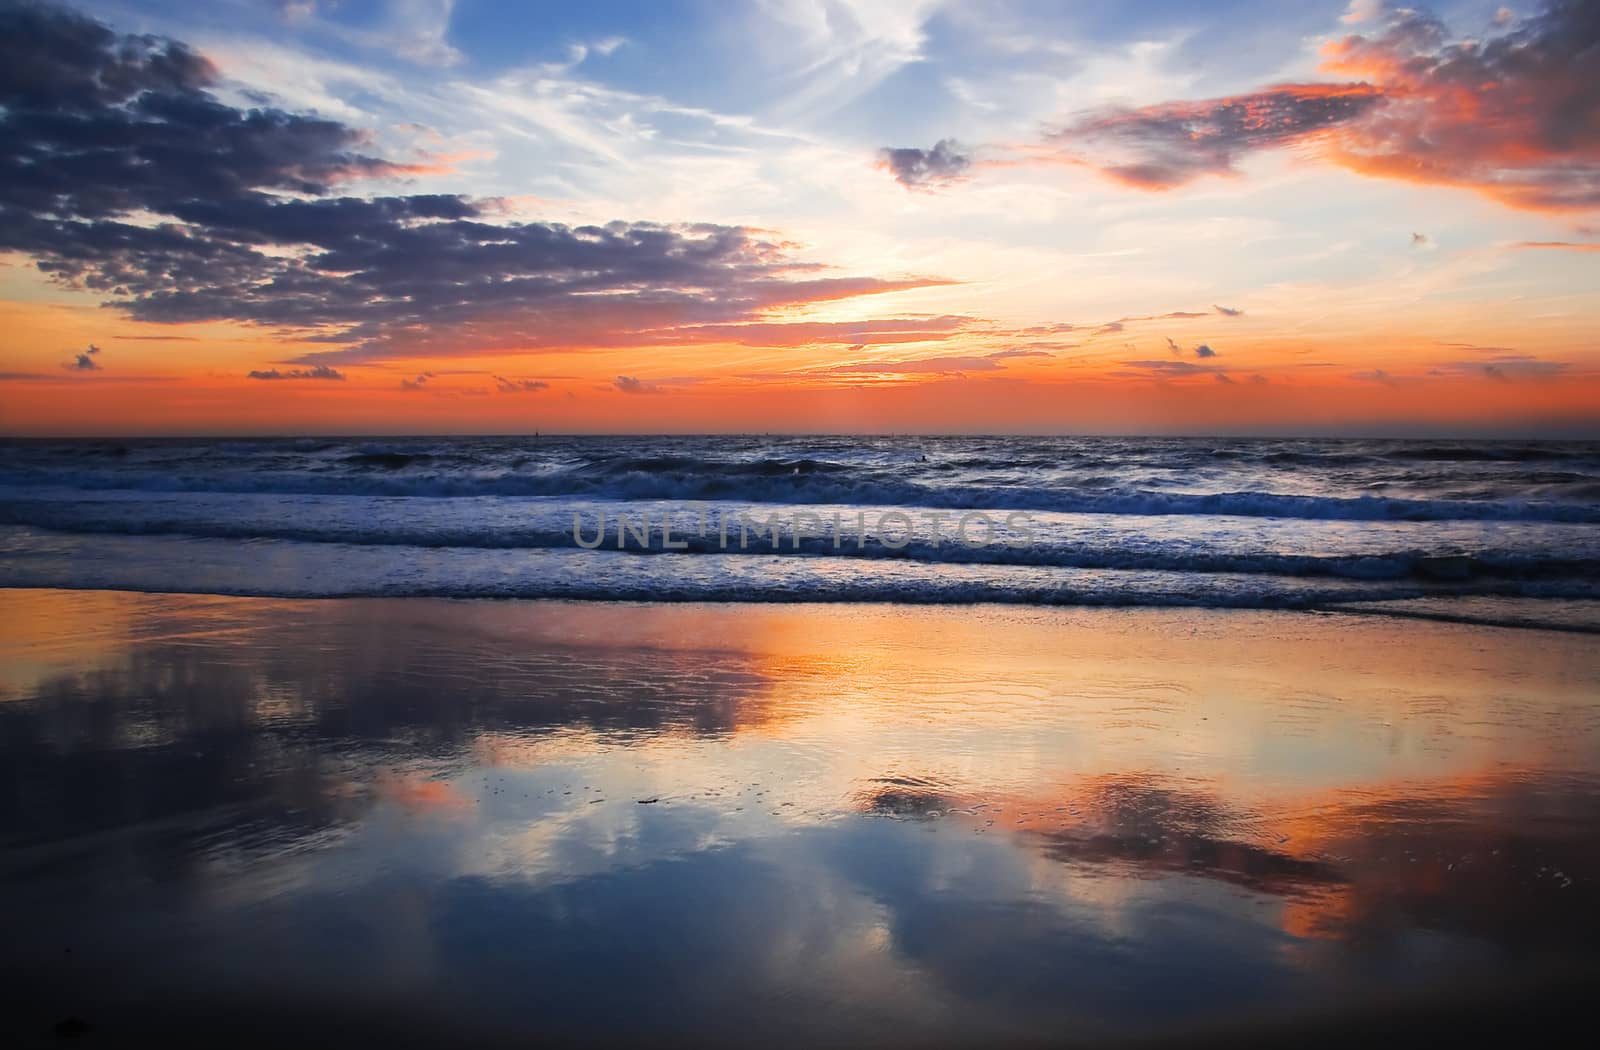 Colorful cloudy sunset at the beach with reflection - horizontal